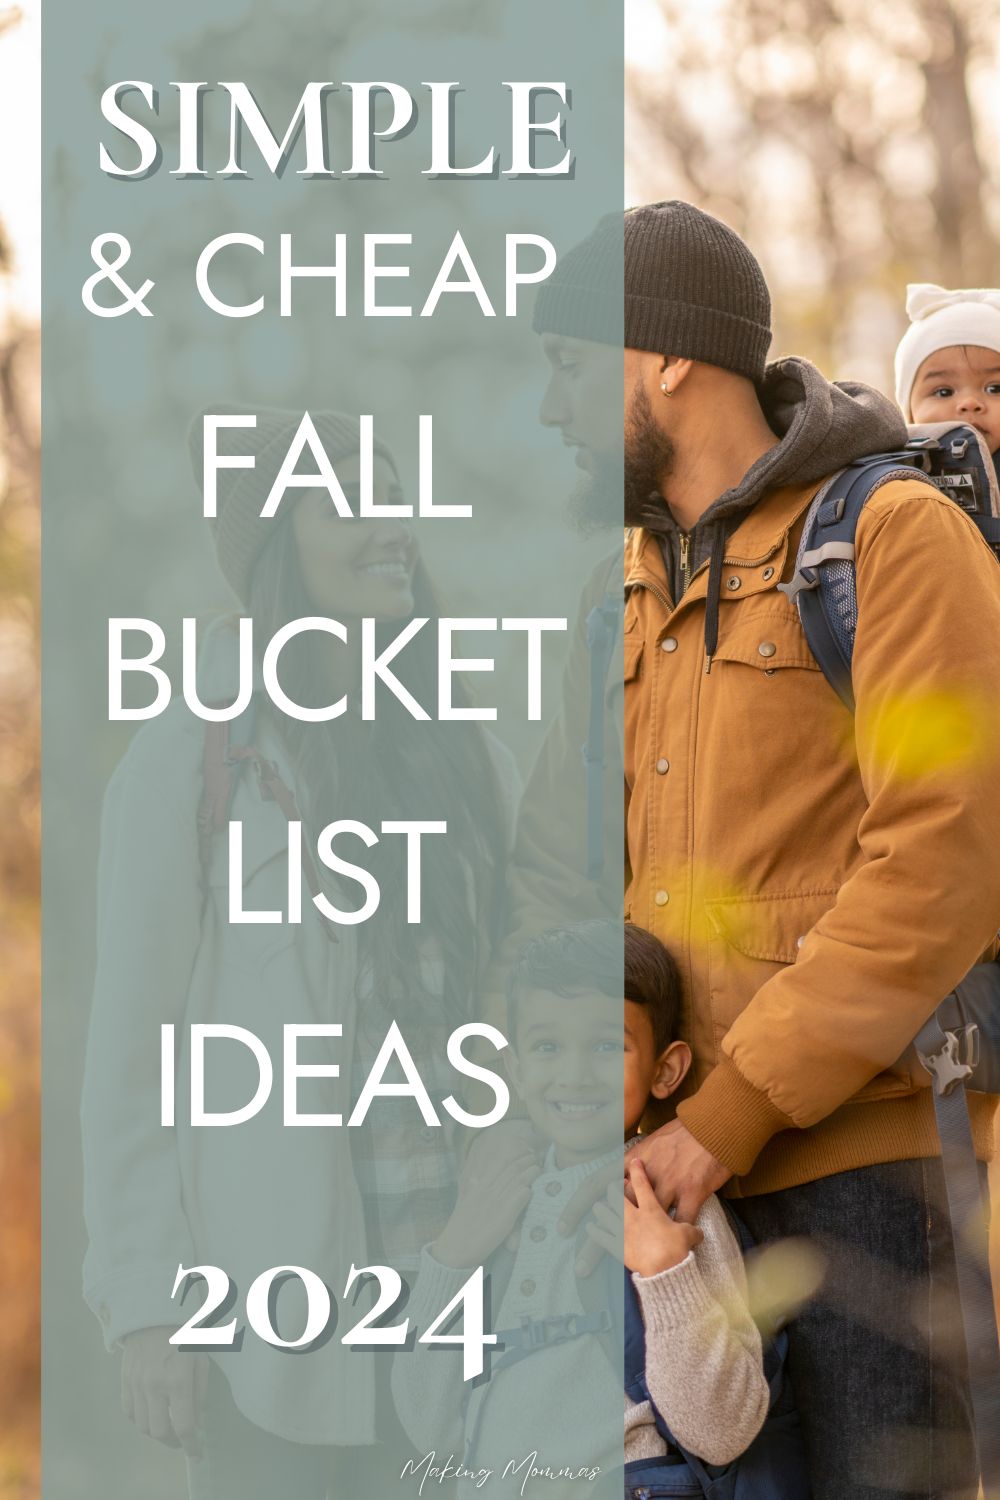 Pin image reading, "Simple and Cheap Fall Bucket List Ideas", with an image of a family dressed for fall weather.